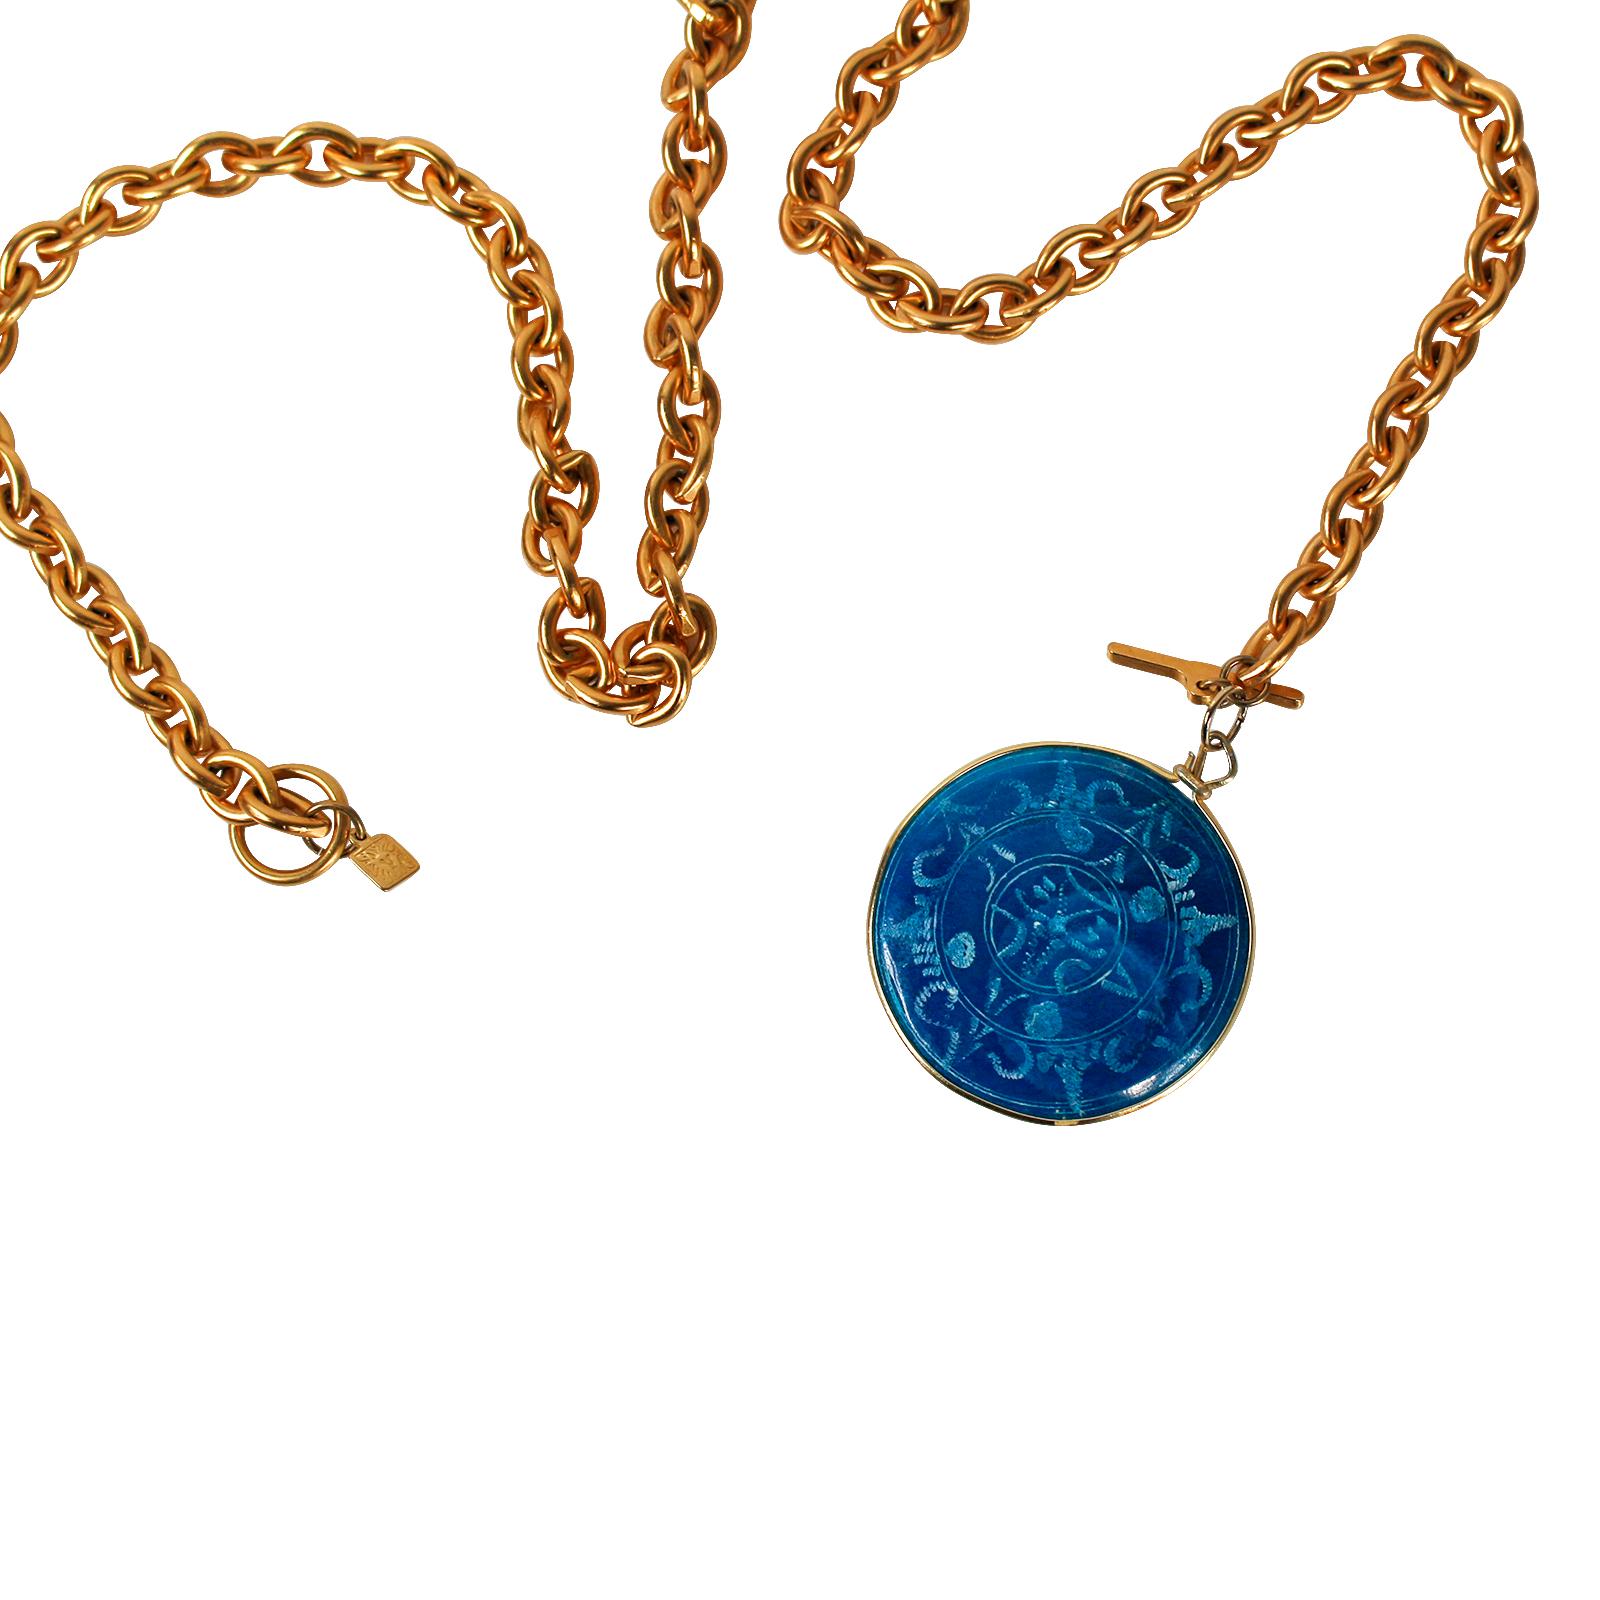 Vintage Anne Klein Toggle Necklace with Blue Disc Circa 1980s For Sale 1